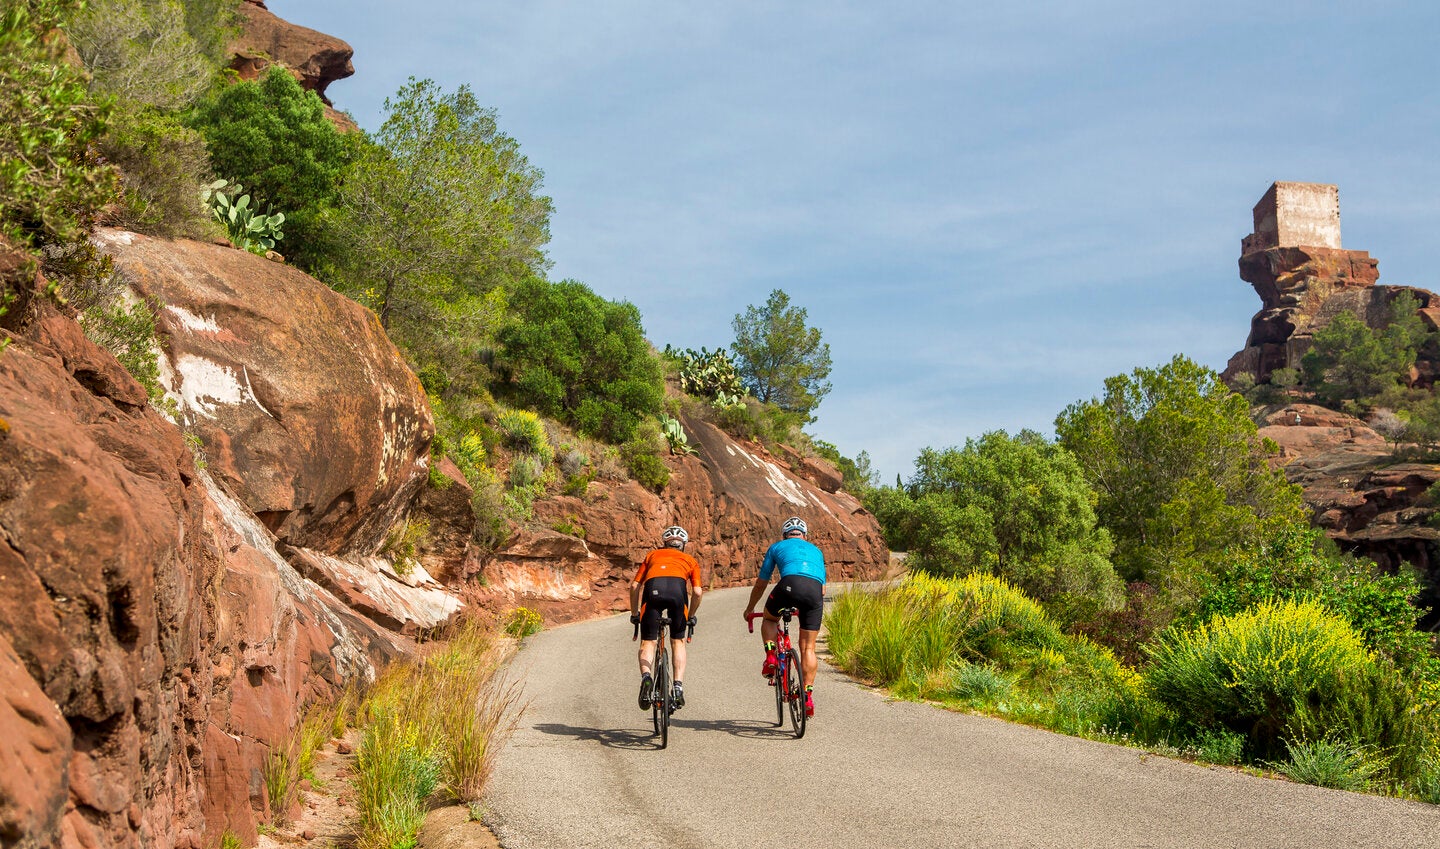 With plenty of car-free roads and smooth paths that wind through mountainous landscapes, Costa Dorada is a cyclist’s dream